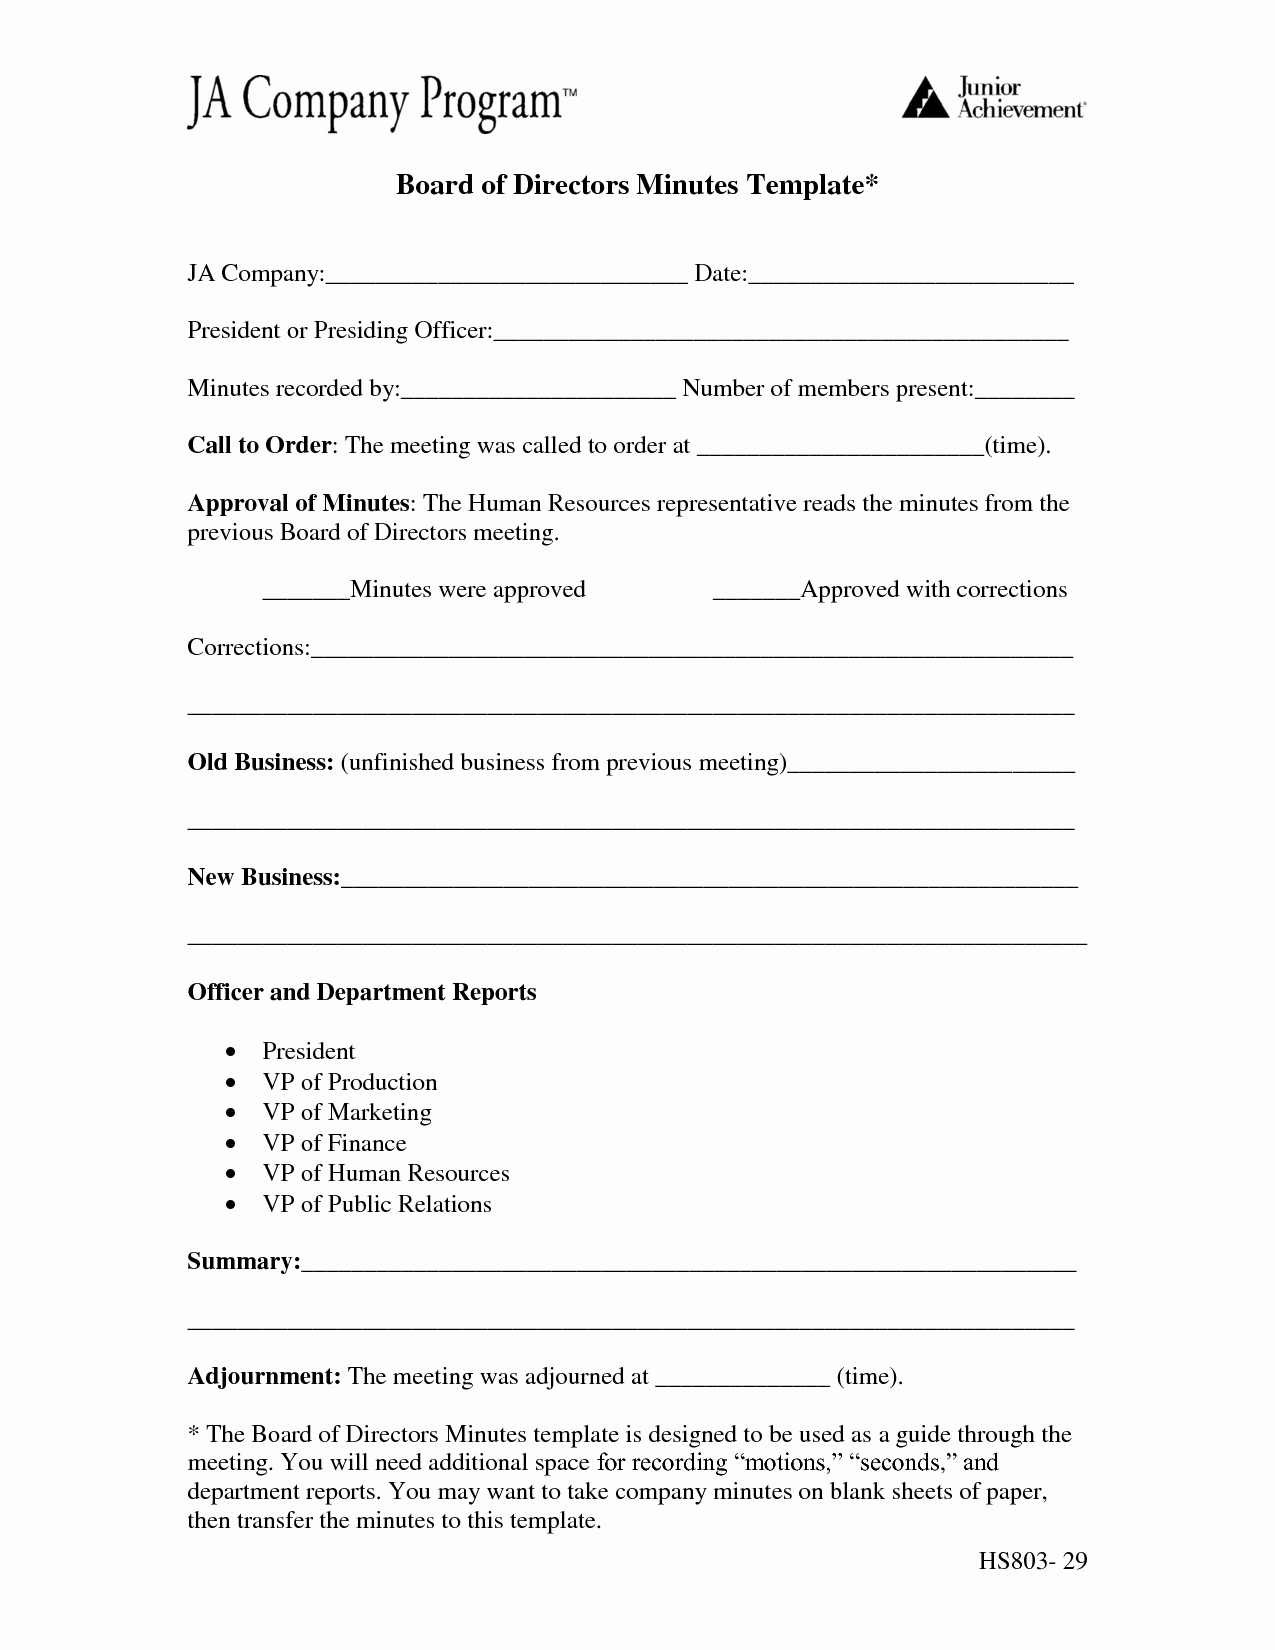 Minutes Of the Meeting Template Elegant Agenda Word Template Example Mughals